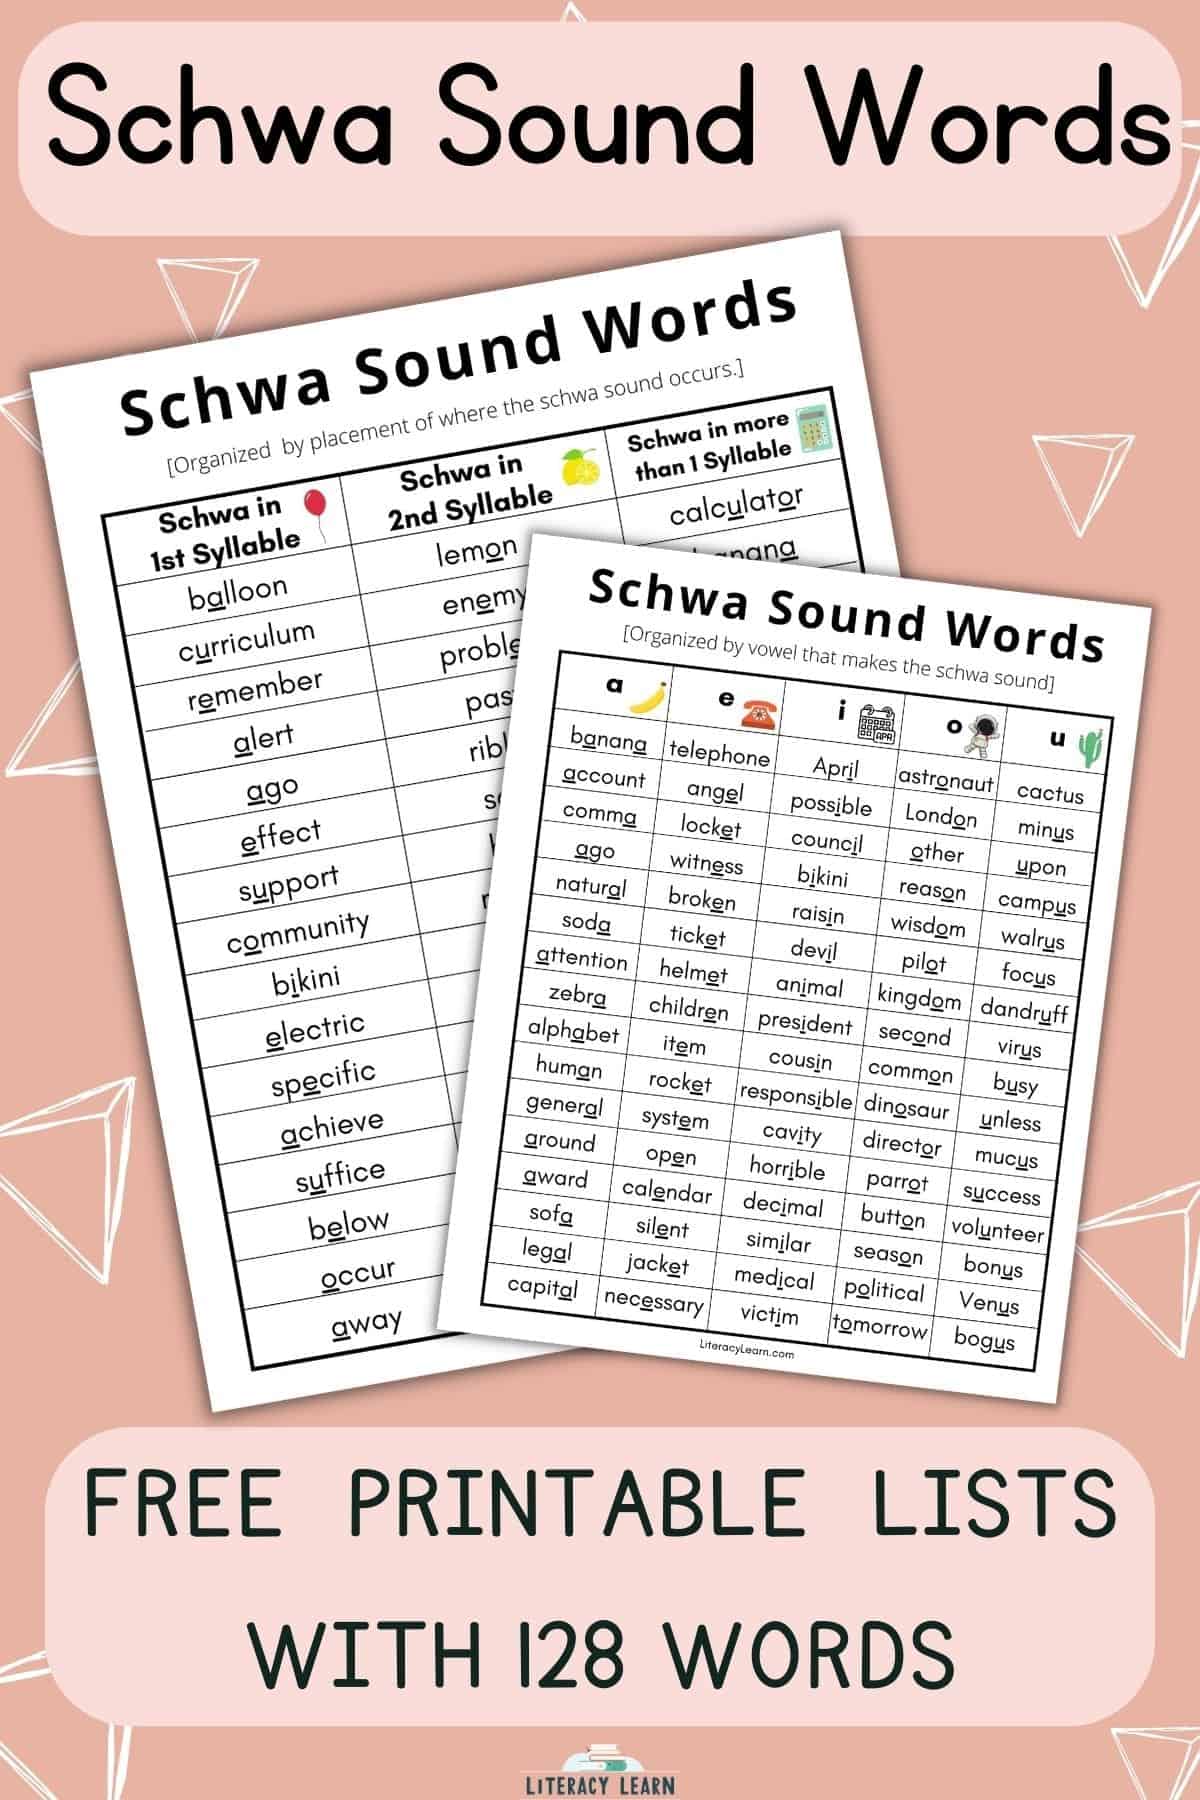 Image with title "Schwa Sound Words" with two printable schwa word lists on peach background.